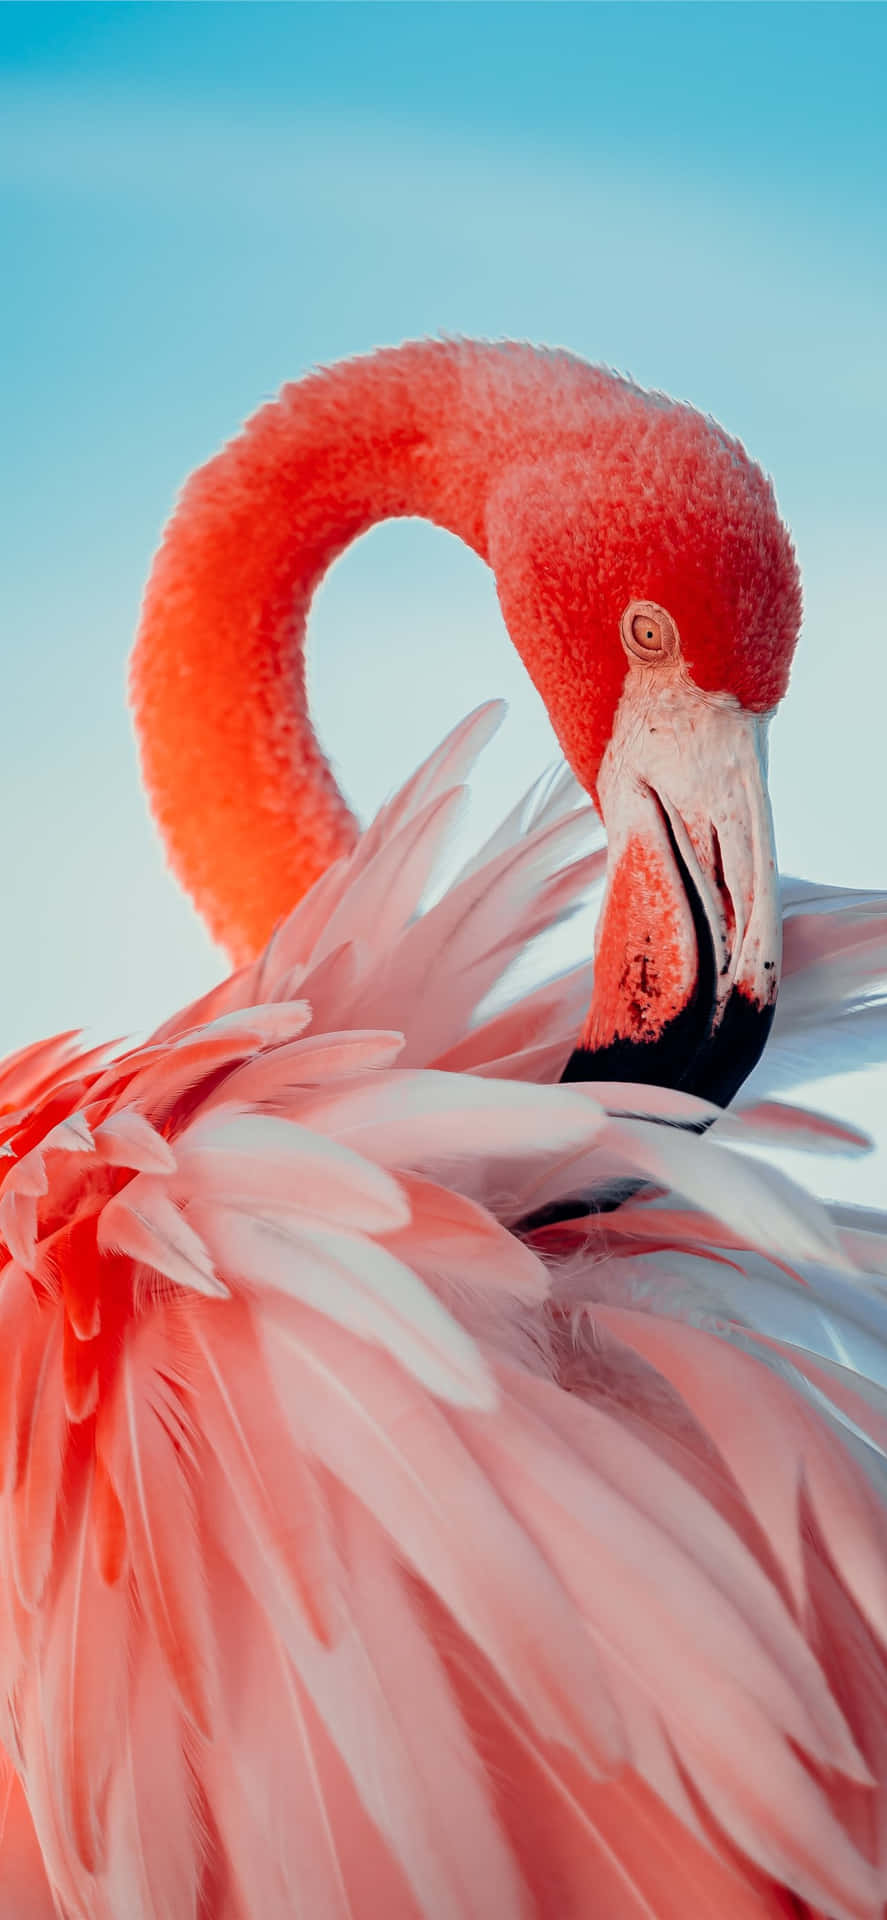 "Flamingo in lush greenery - perfect for your iPhone background" Wallpaper